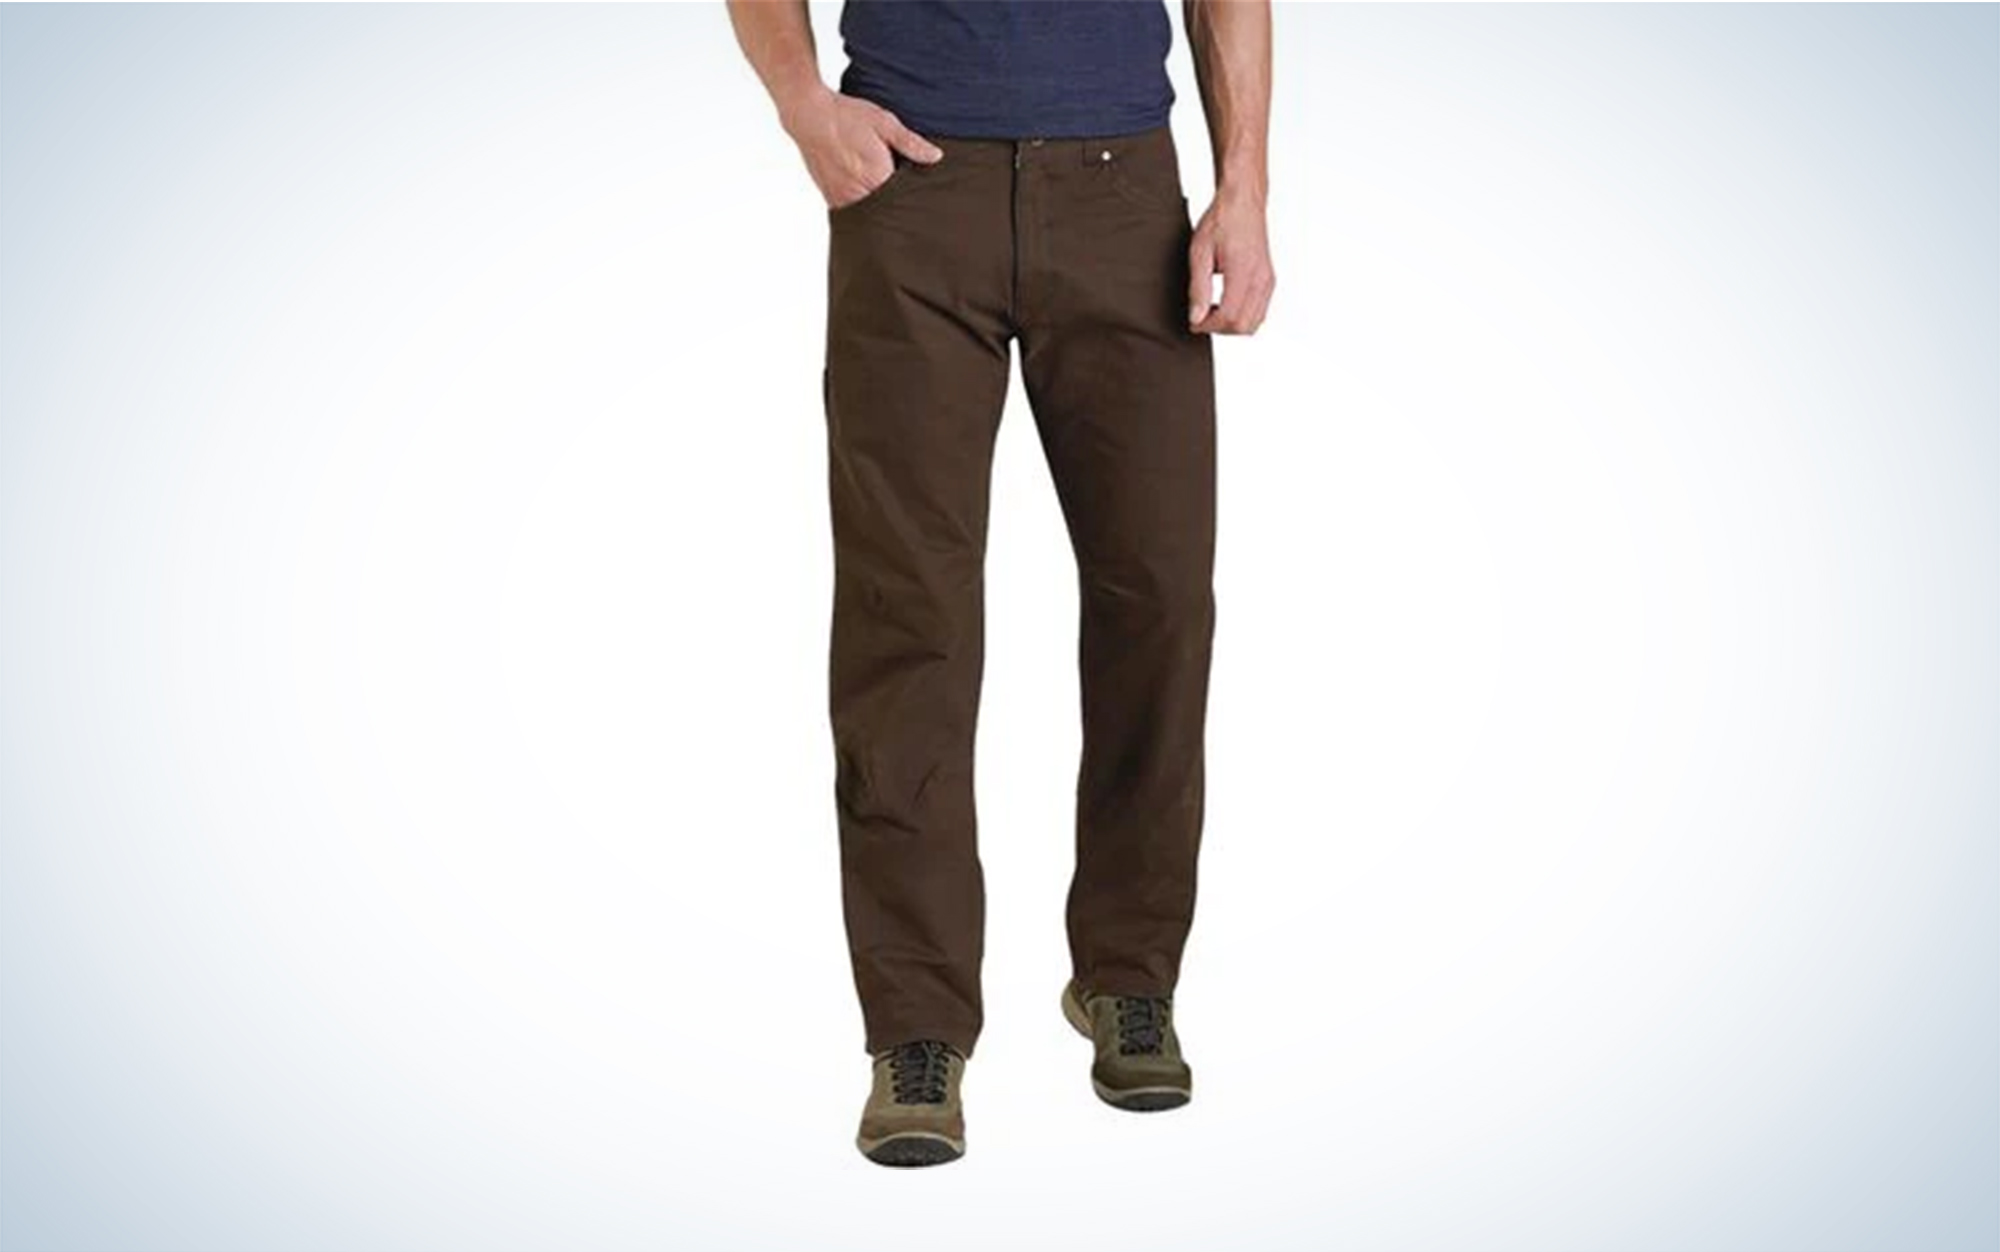 The KUHL Rydr pant is available in espresso.